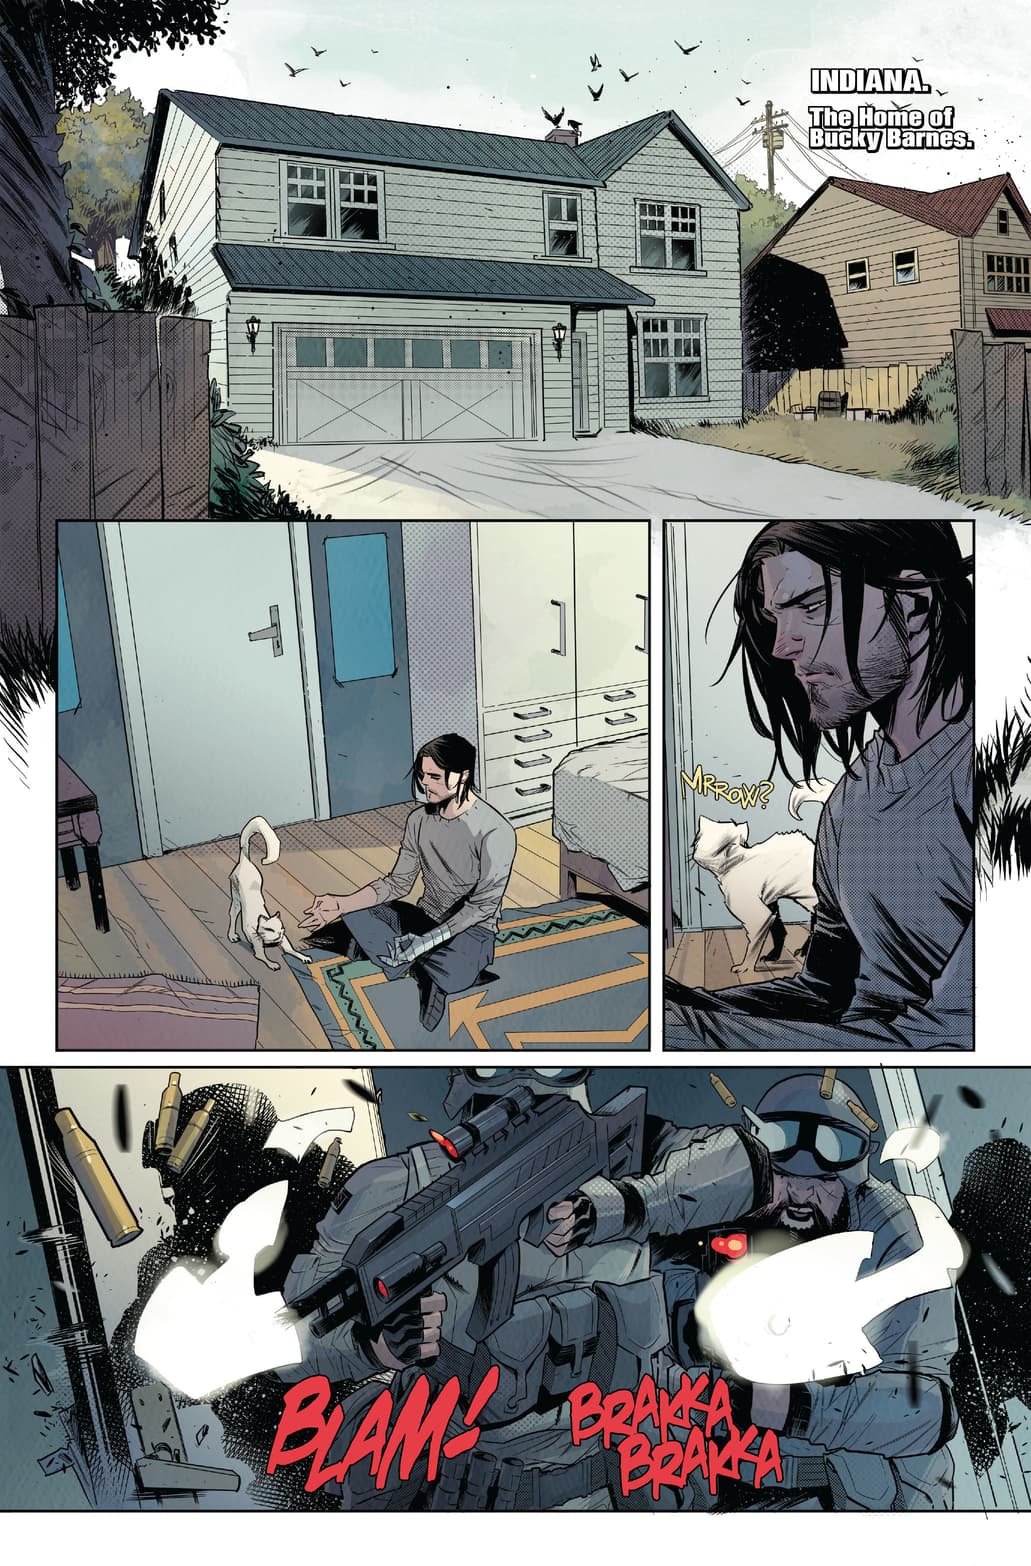 Falcon and Winter Soldier #1